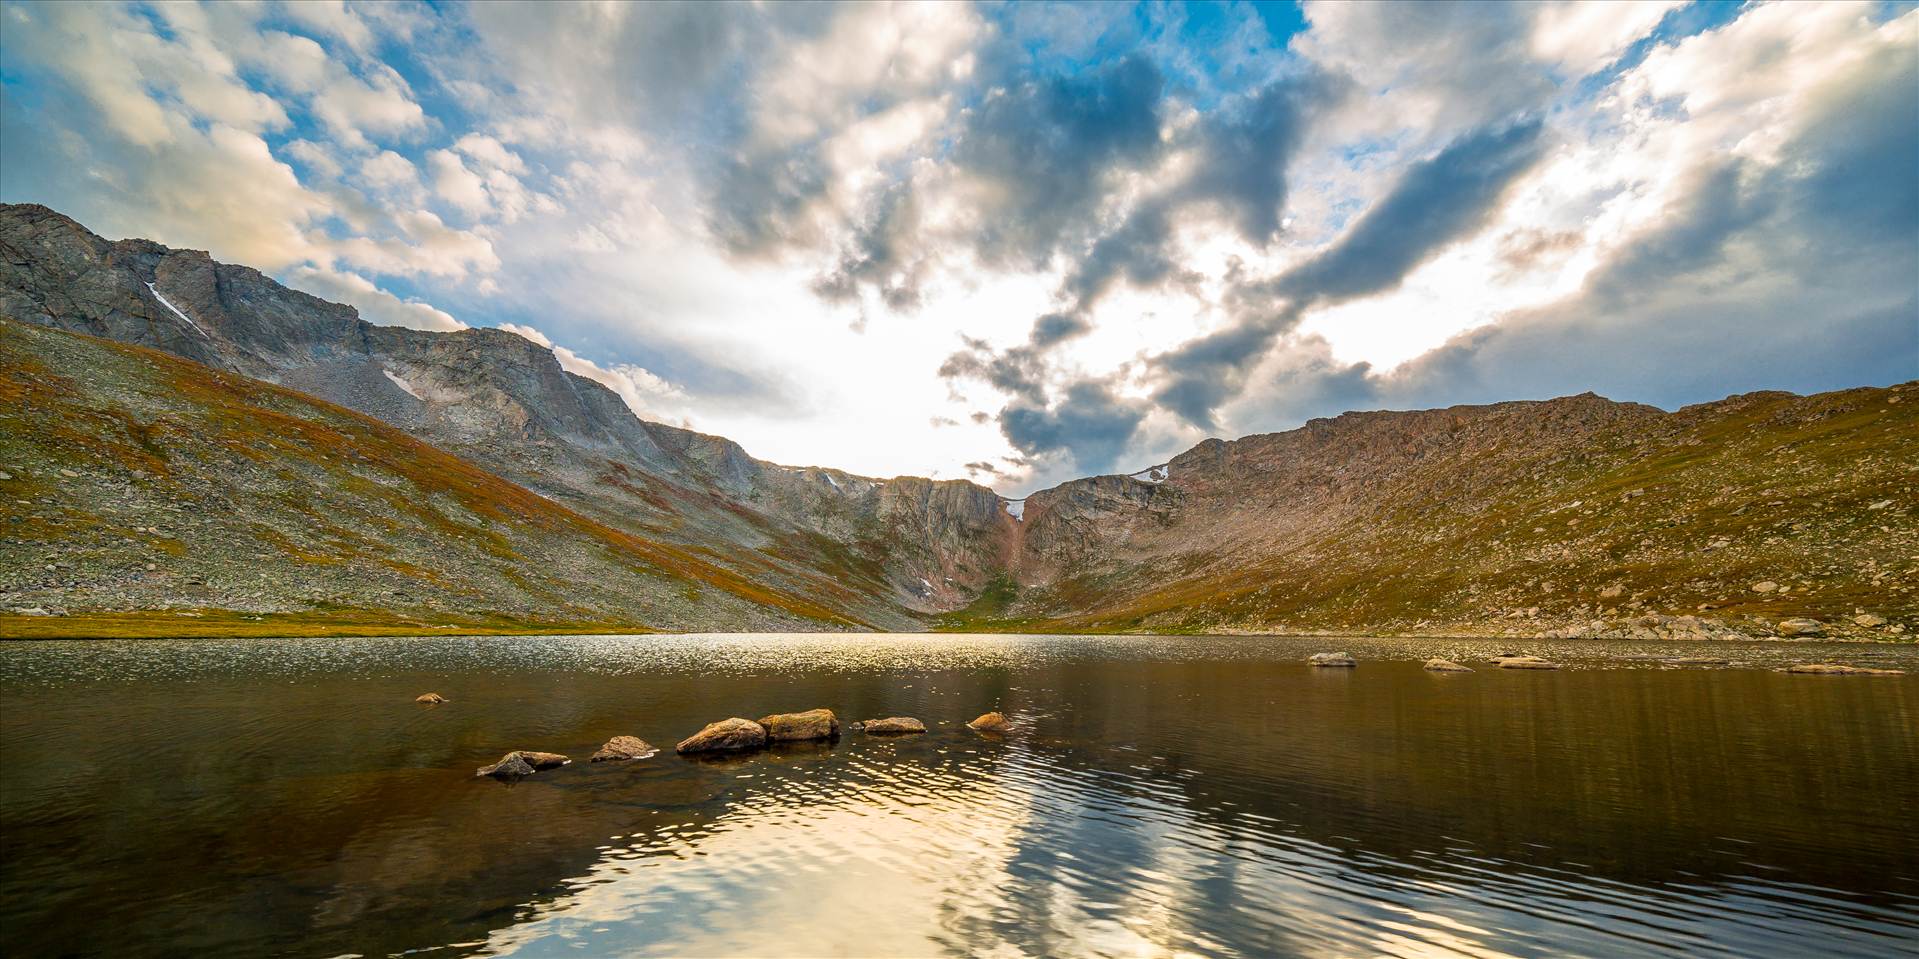 Summit Lake, Mt Evans Summit Lake, near the summit of Mt Evans, Colorado. Available in wide (2:1) or typical (2:3) prints. by Scott Smith Photos